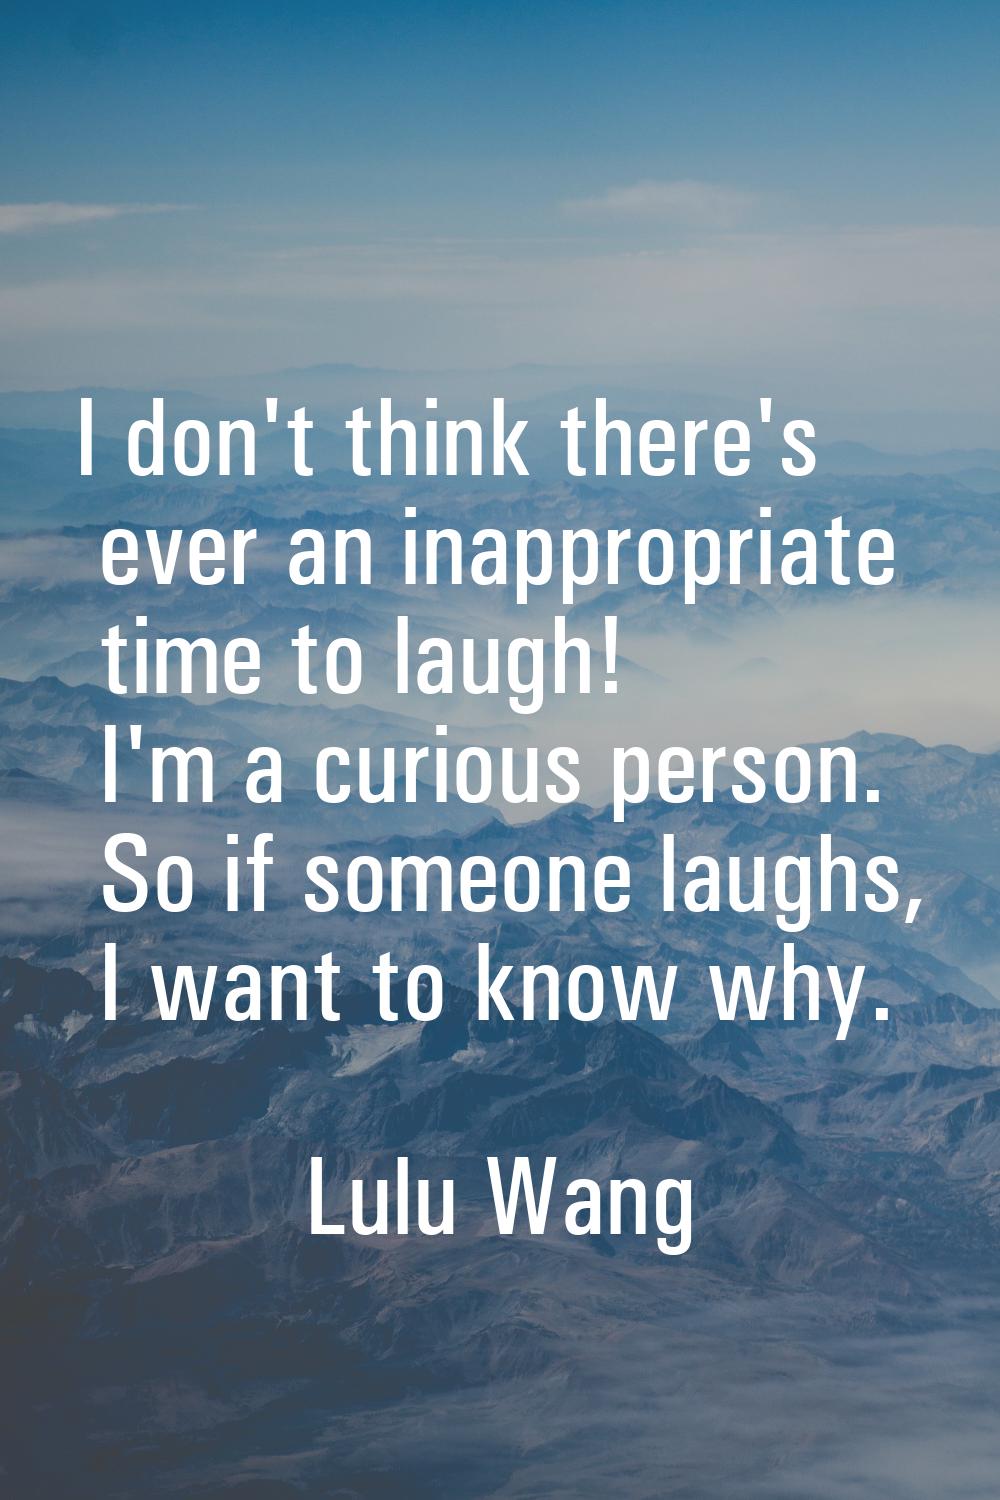 I don't think there's ever an inappropriate time to laugh! I'm a curious person. So if someone laug